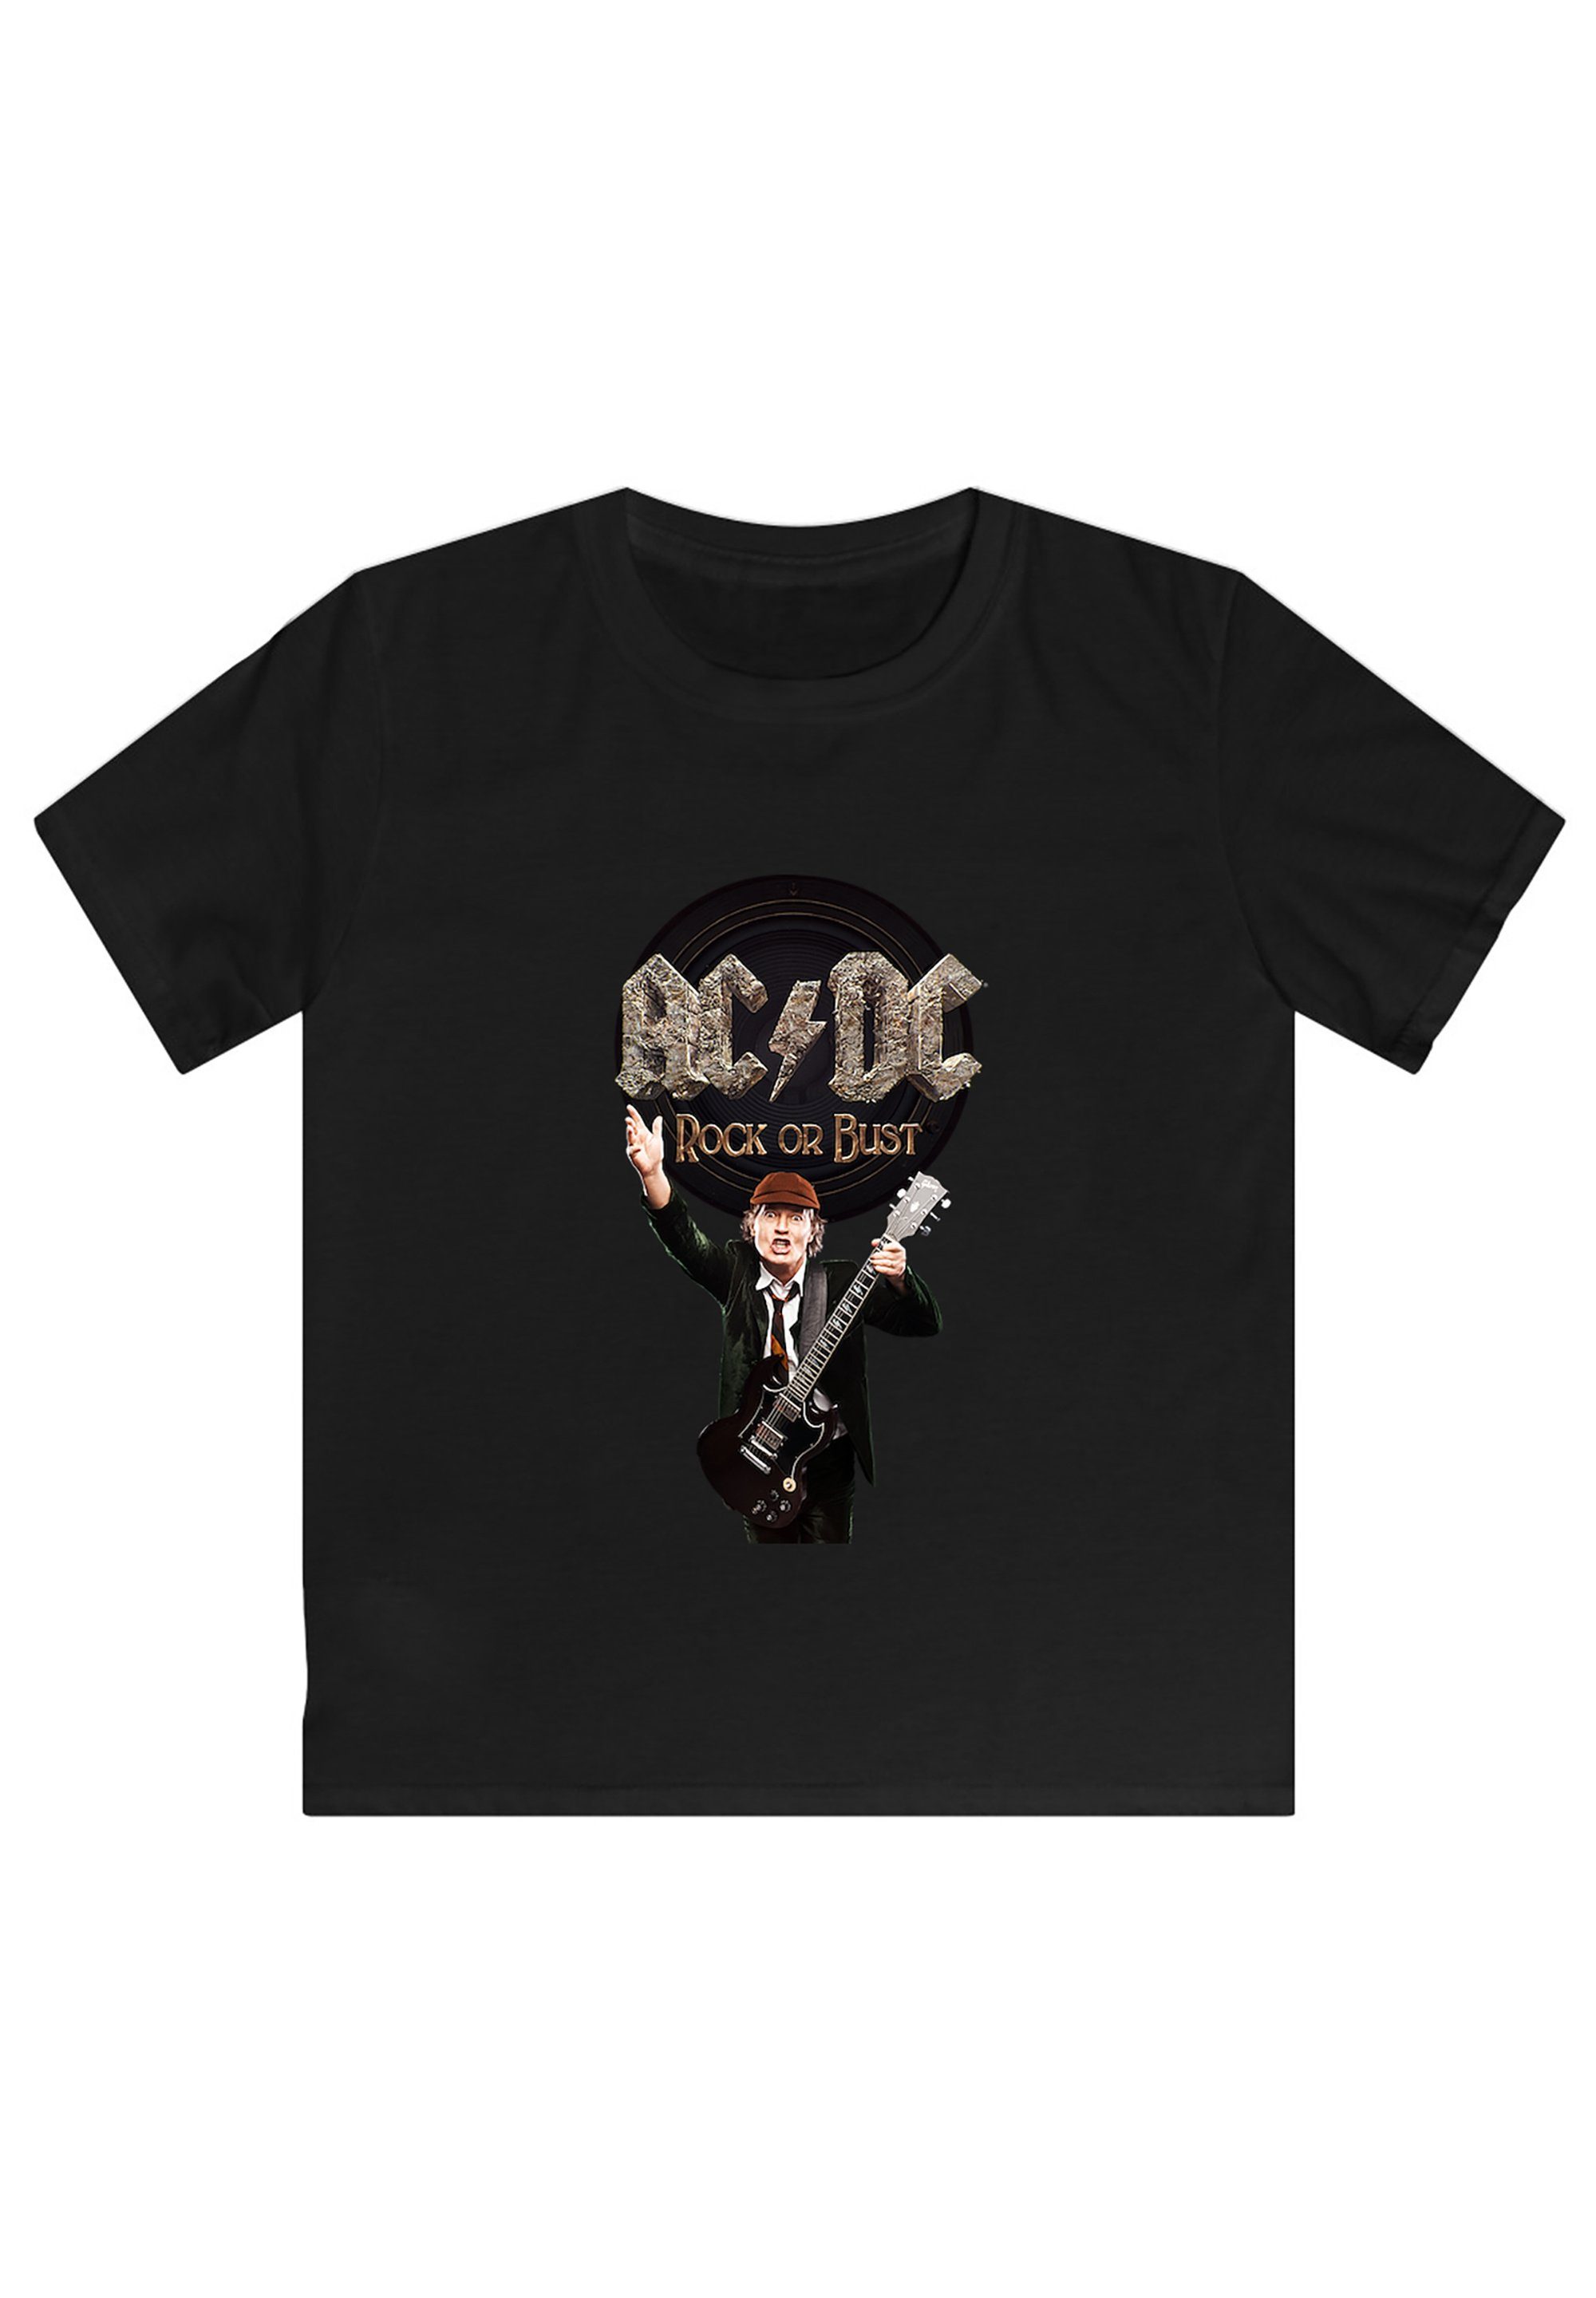 Angus für Young Bust Kinder & Rock ACDC Print F4NT4STIC Herren T-Shirt Or